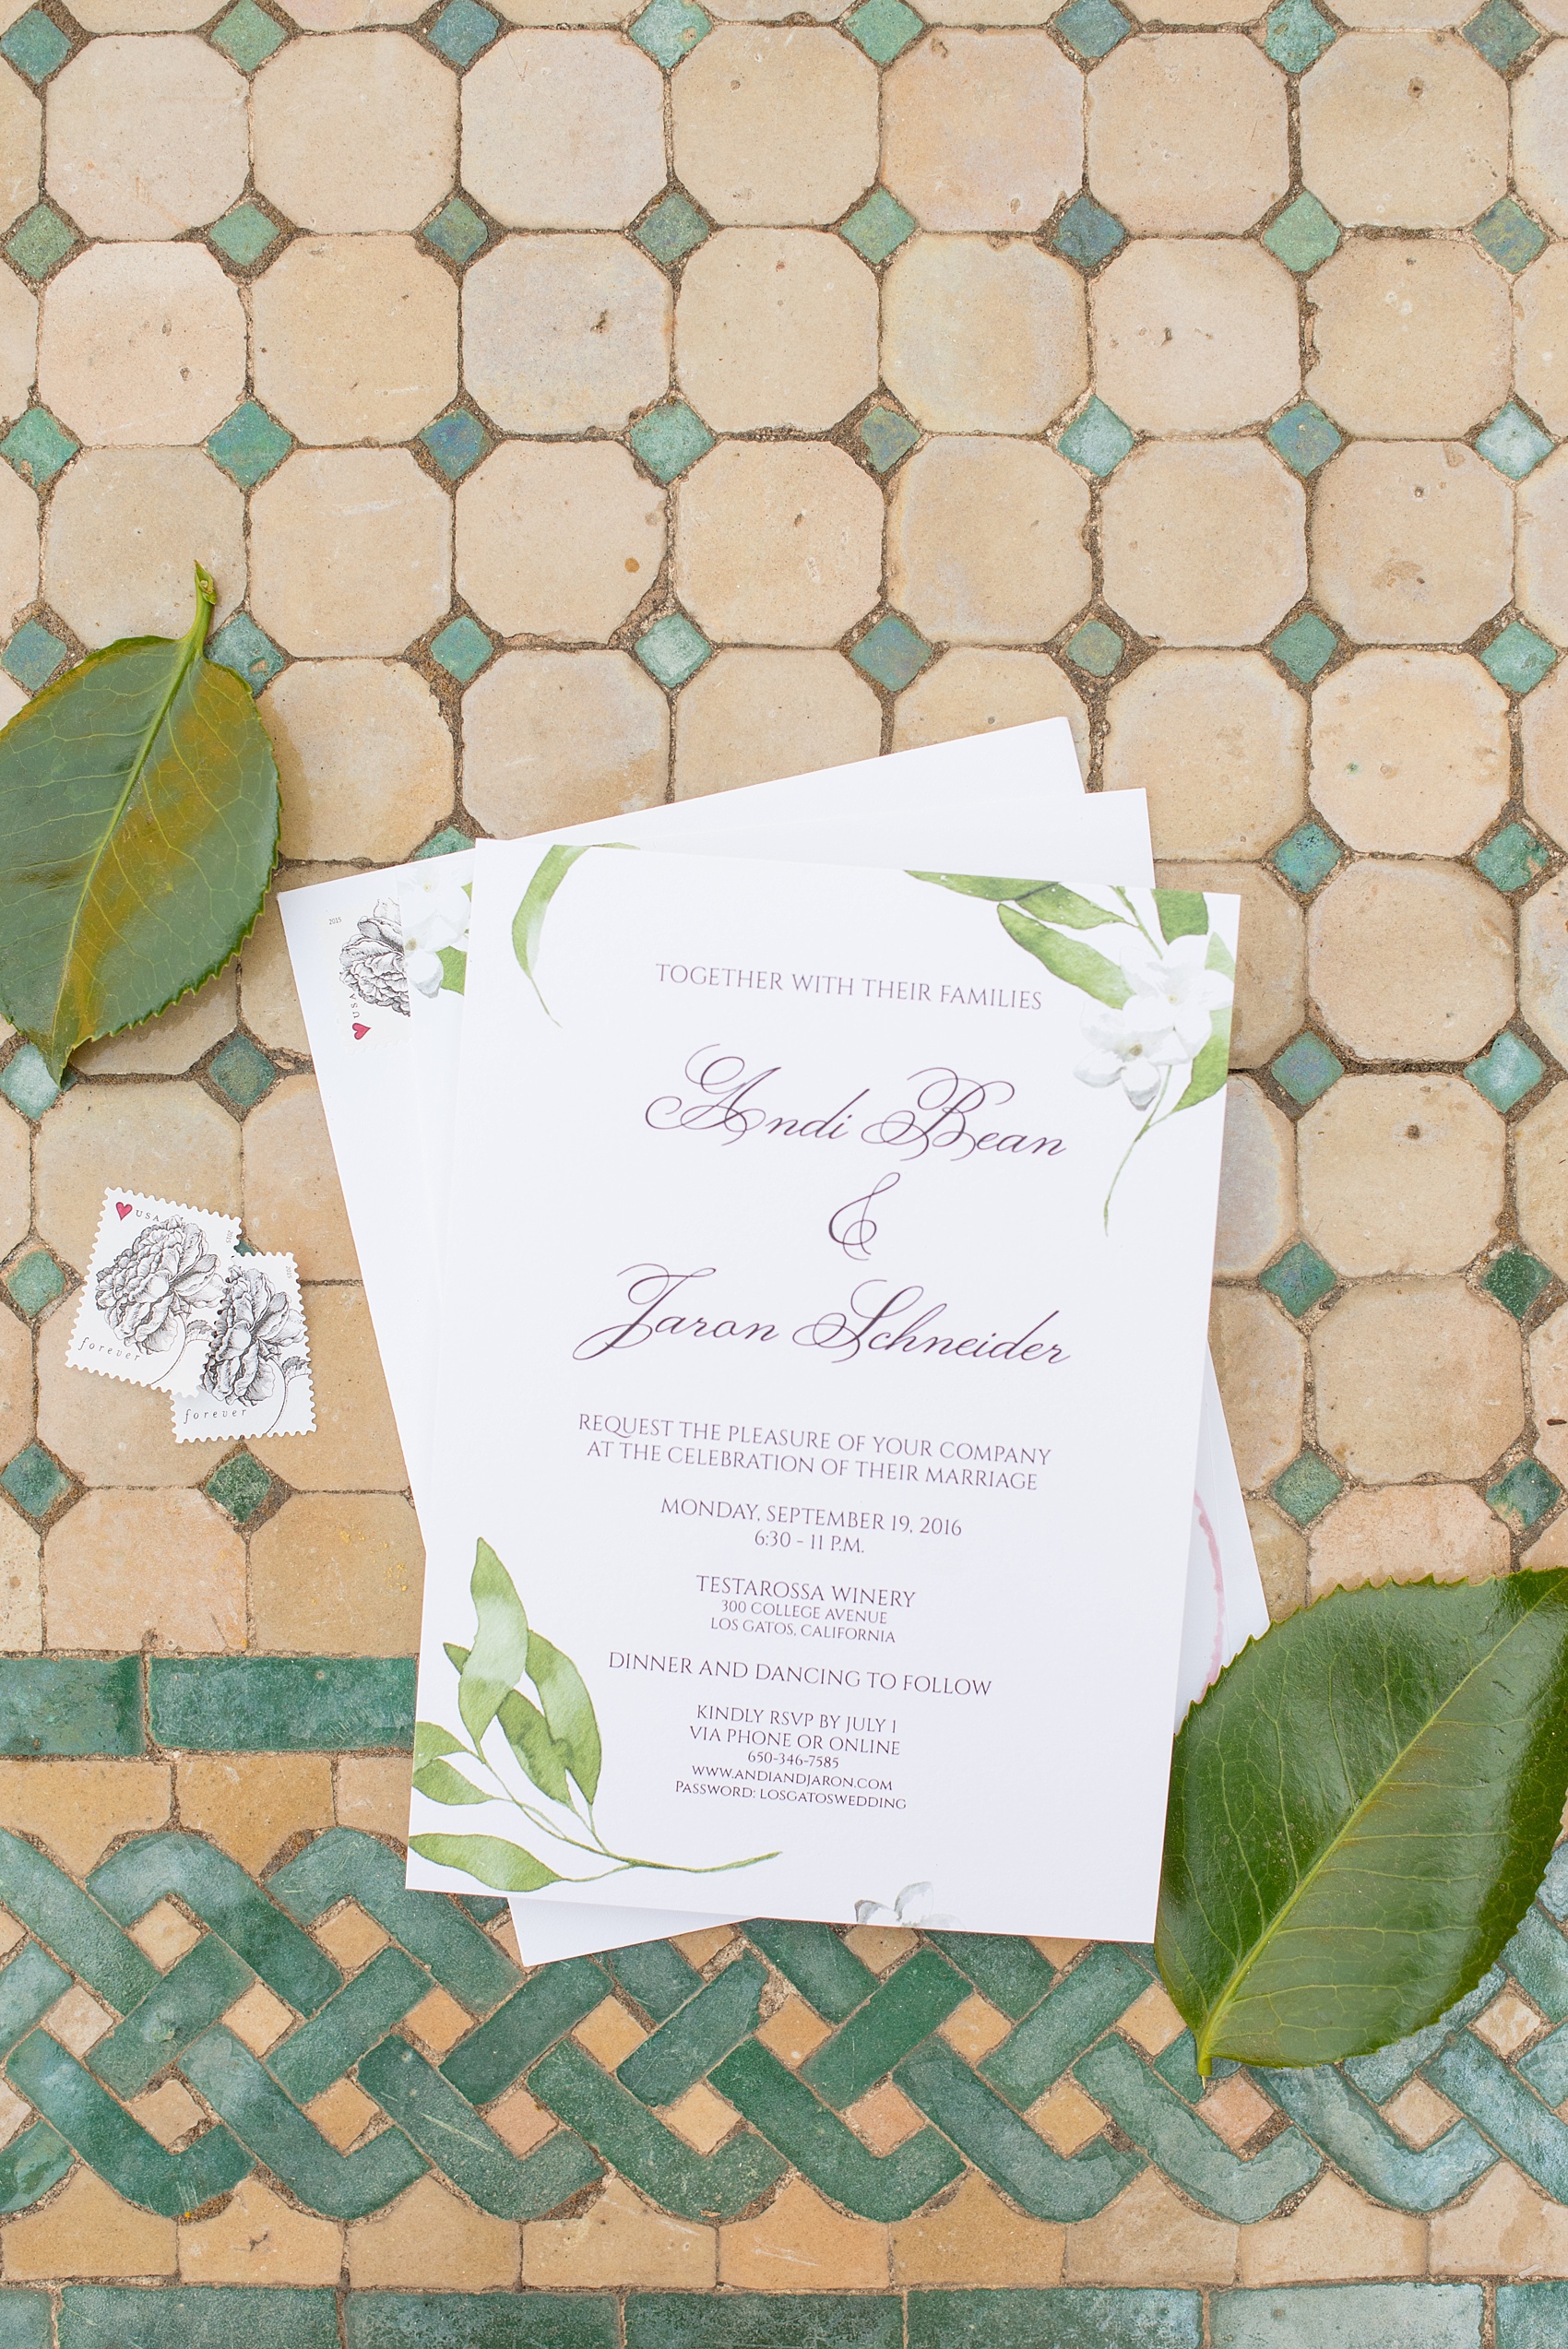 Mikkel Paige Photography photo of an invitation for a California wedding at Testarossa Winery with getting ready images at Hotel Los Gatos.